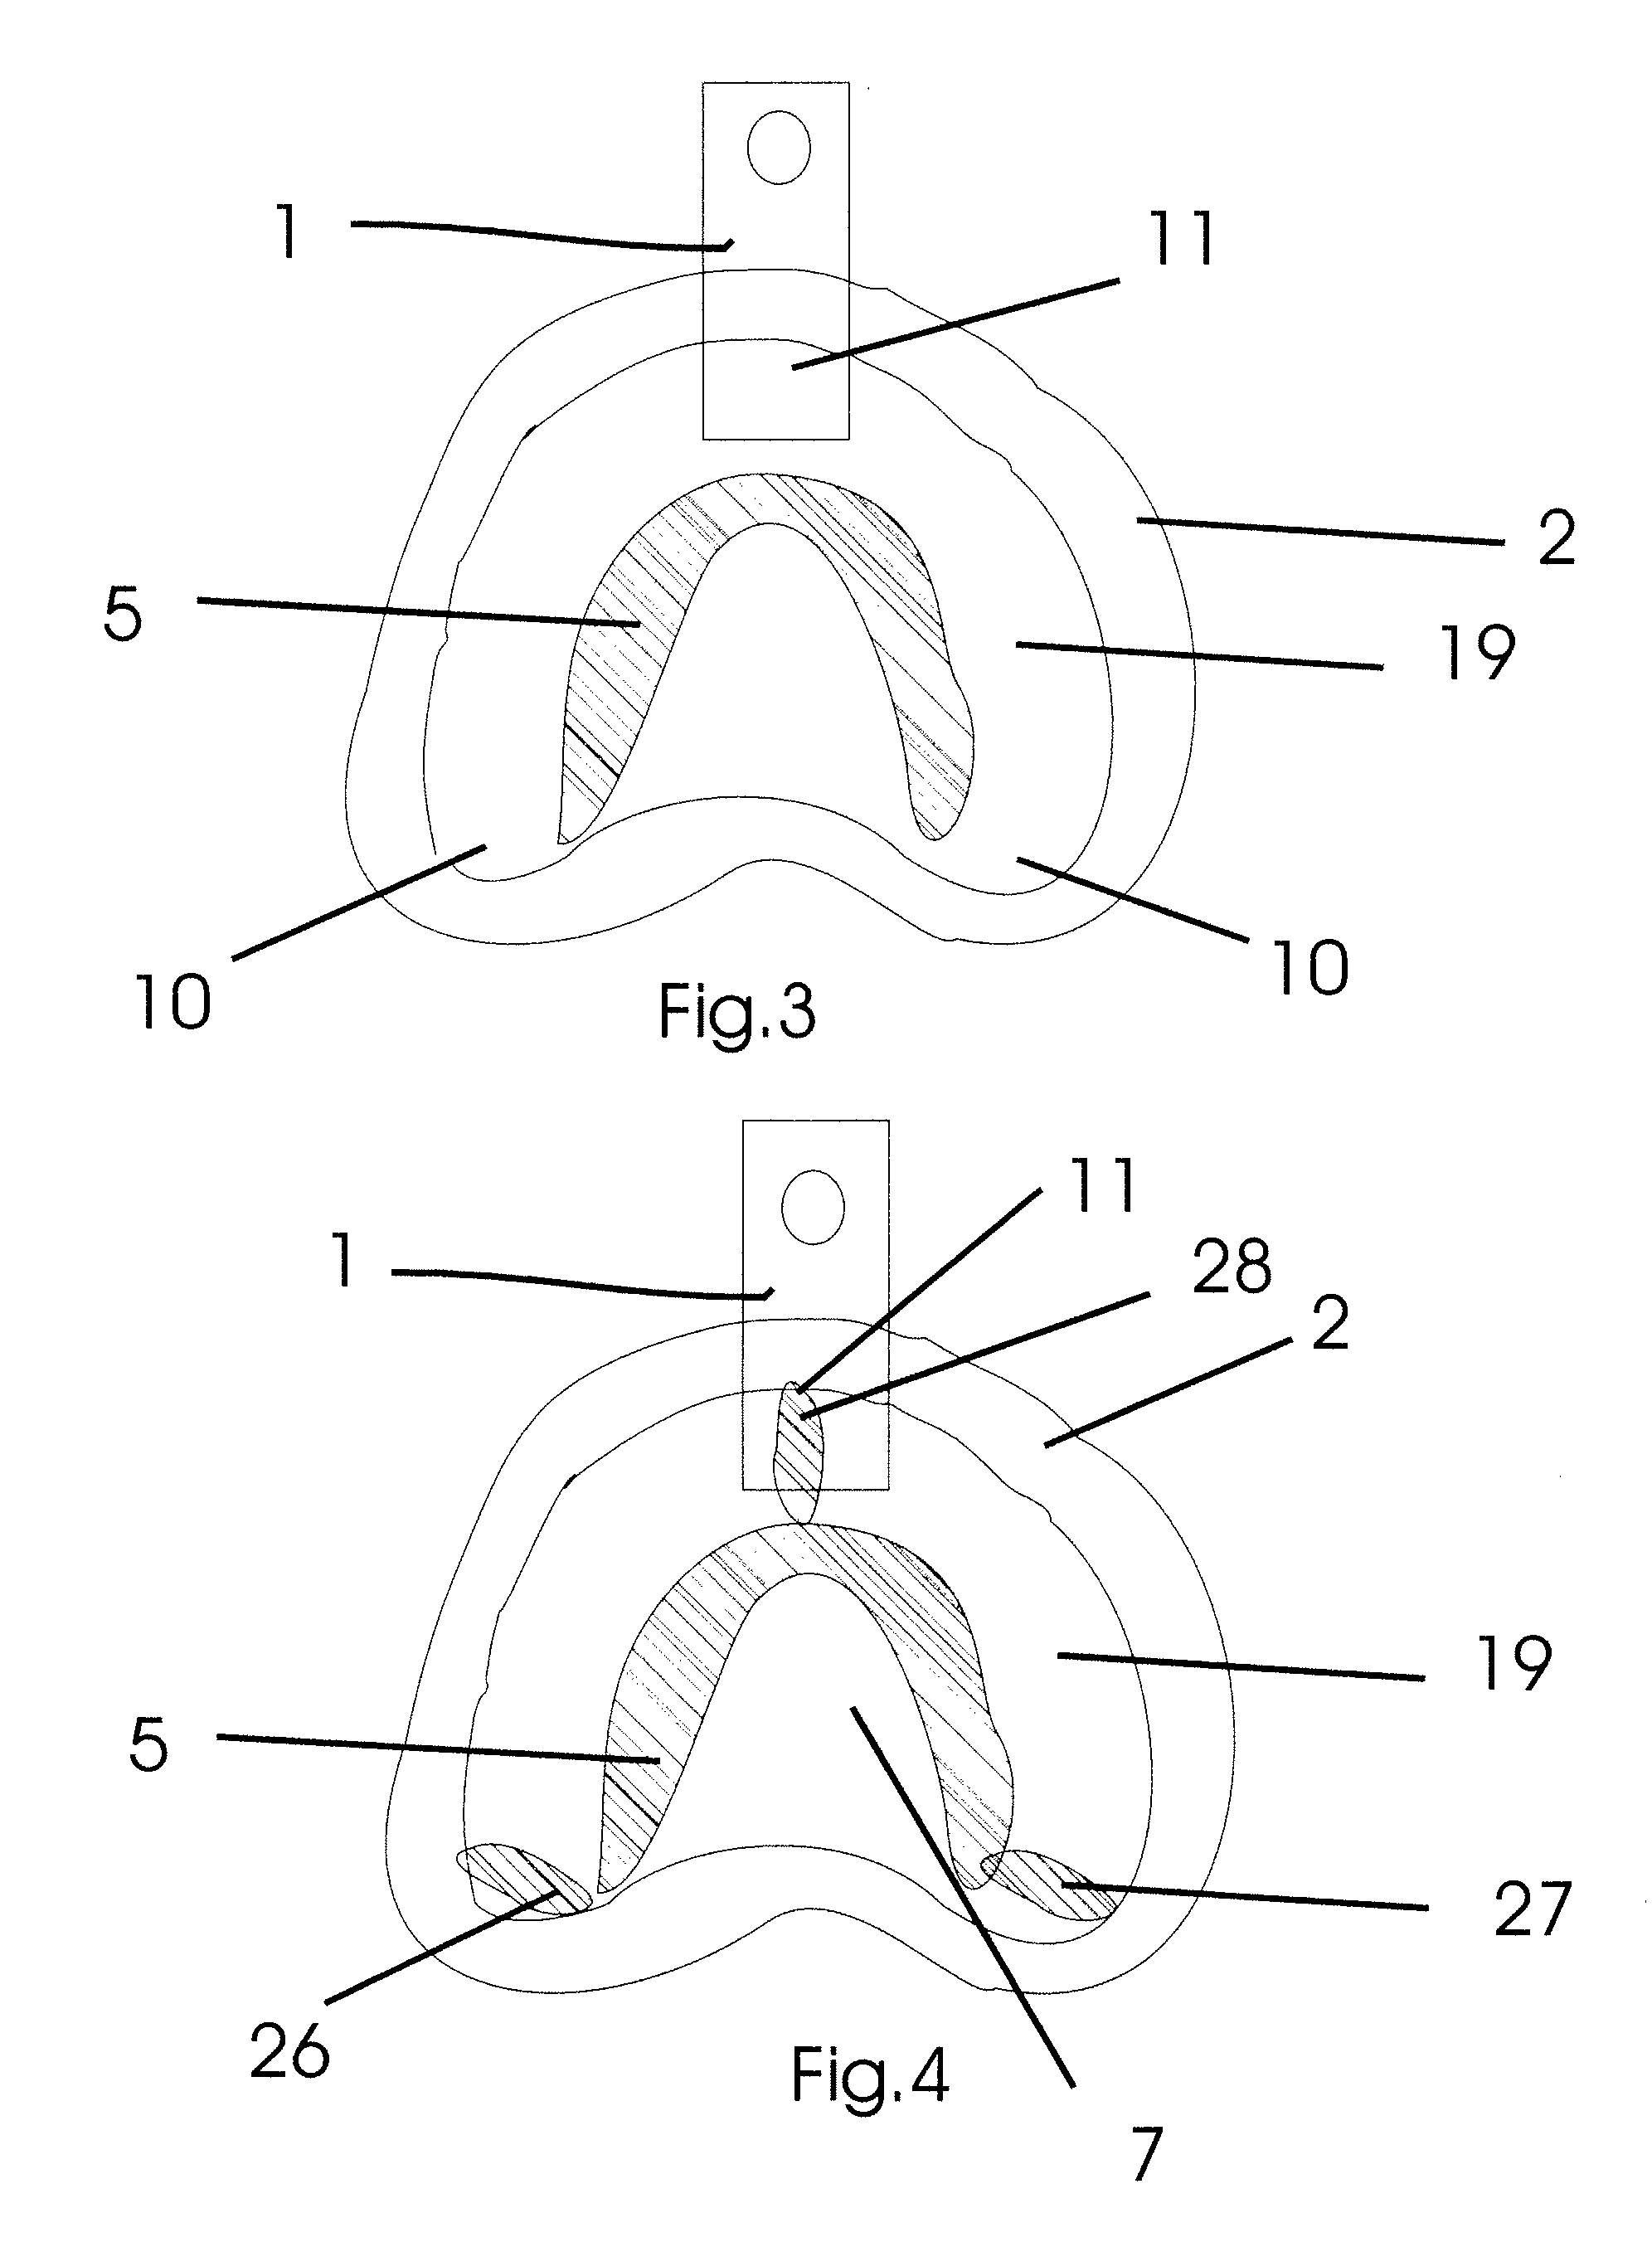 No Distortion Impression Tray and Method of Use